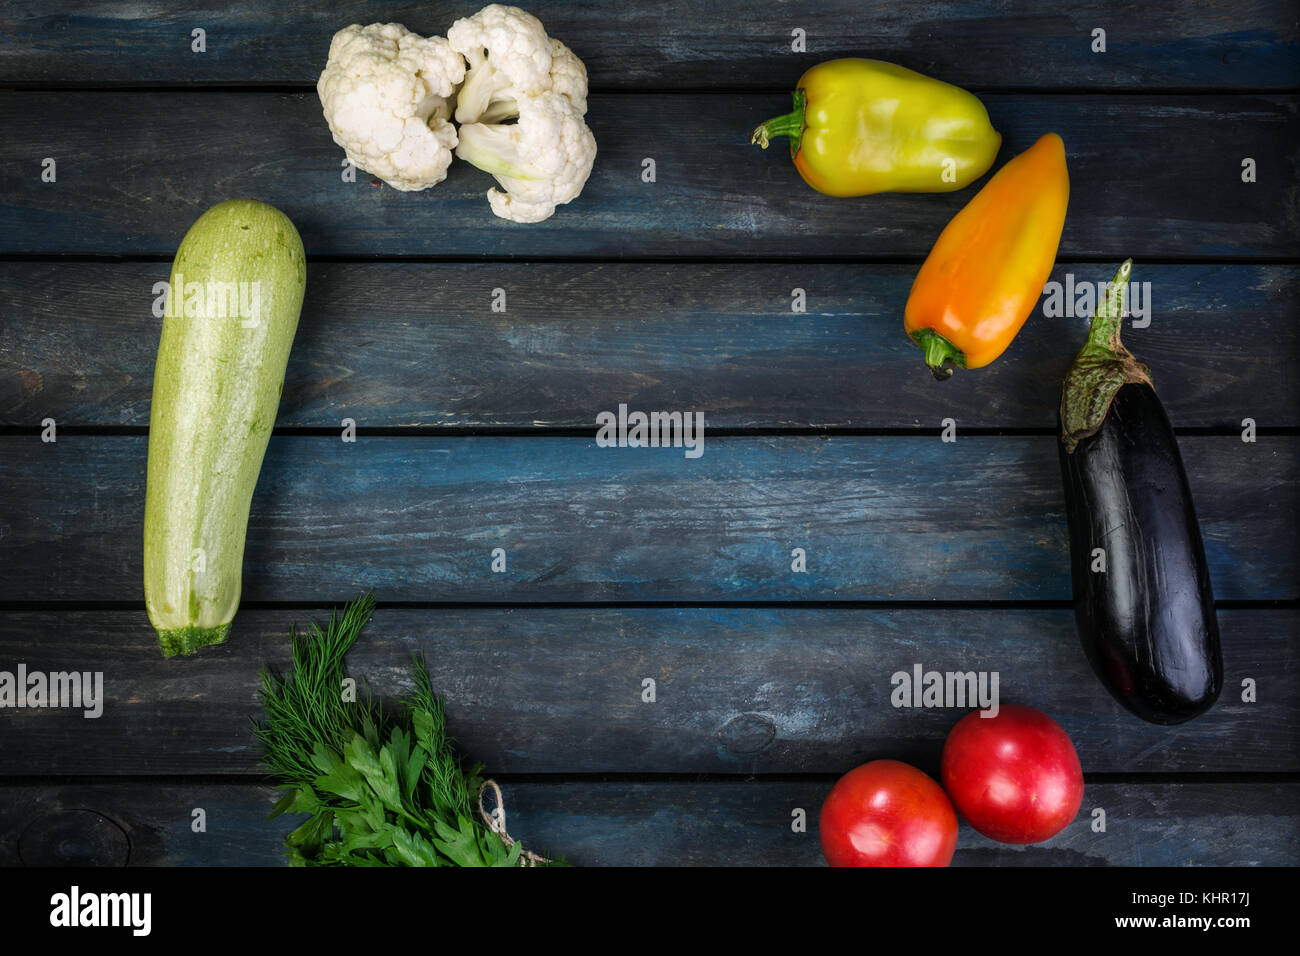 Ingredients for grilled vegetables salad with zucchini, eggplant, onions, peppers and tomato. On a colored wooden background. Top view Stock Photo